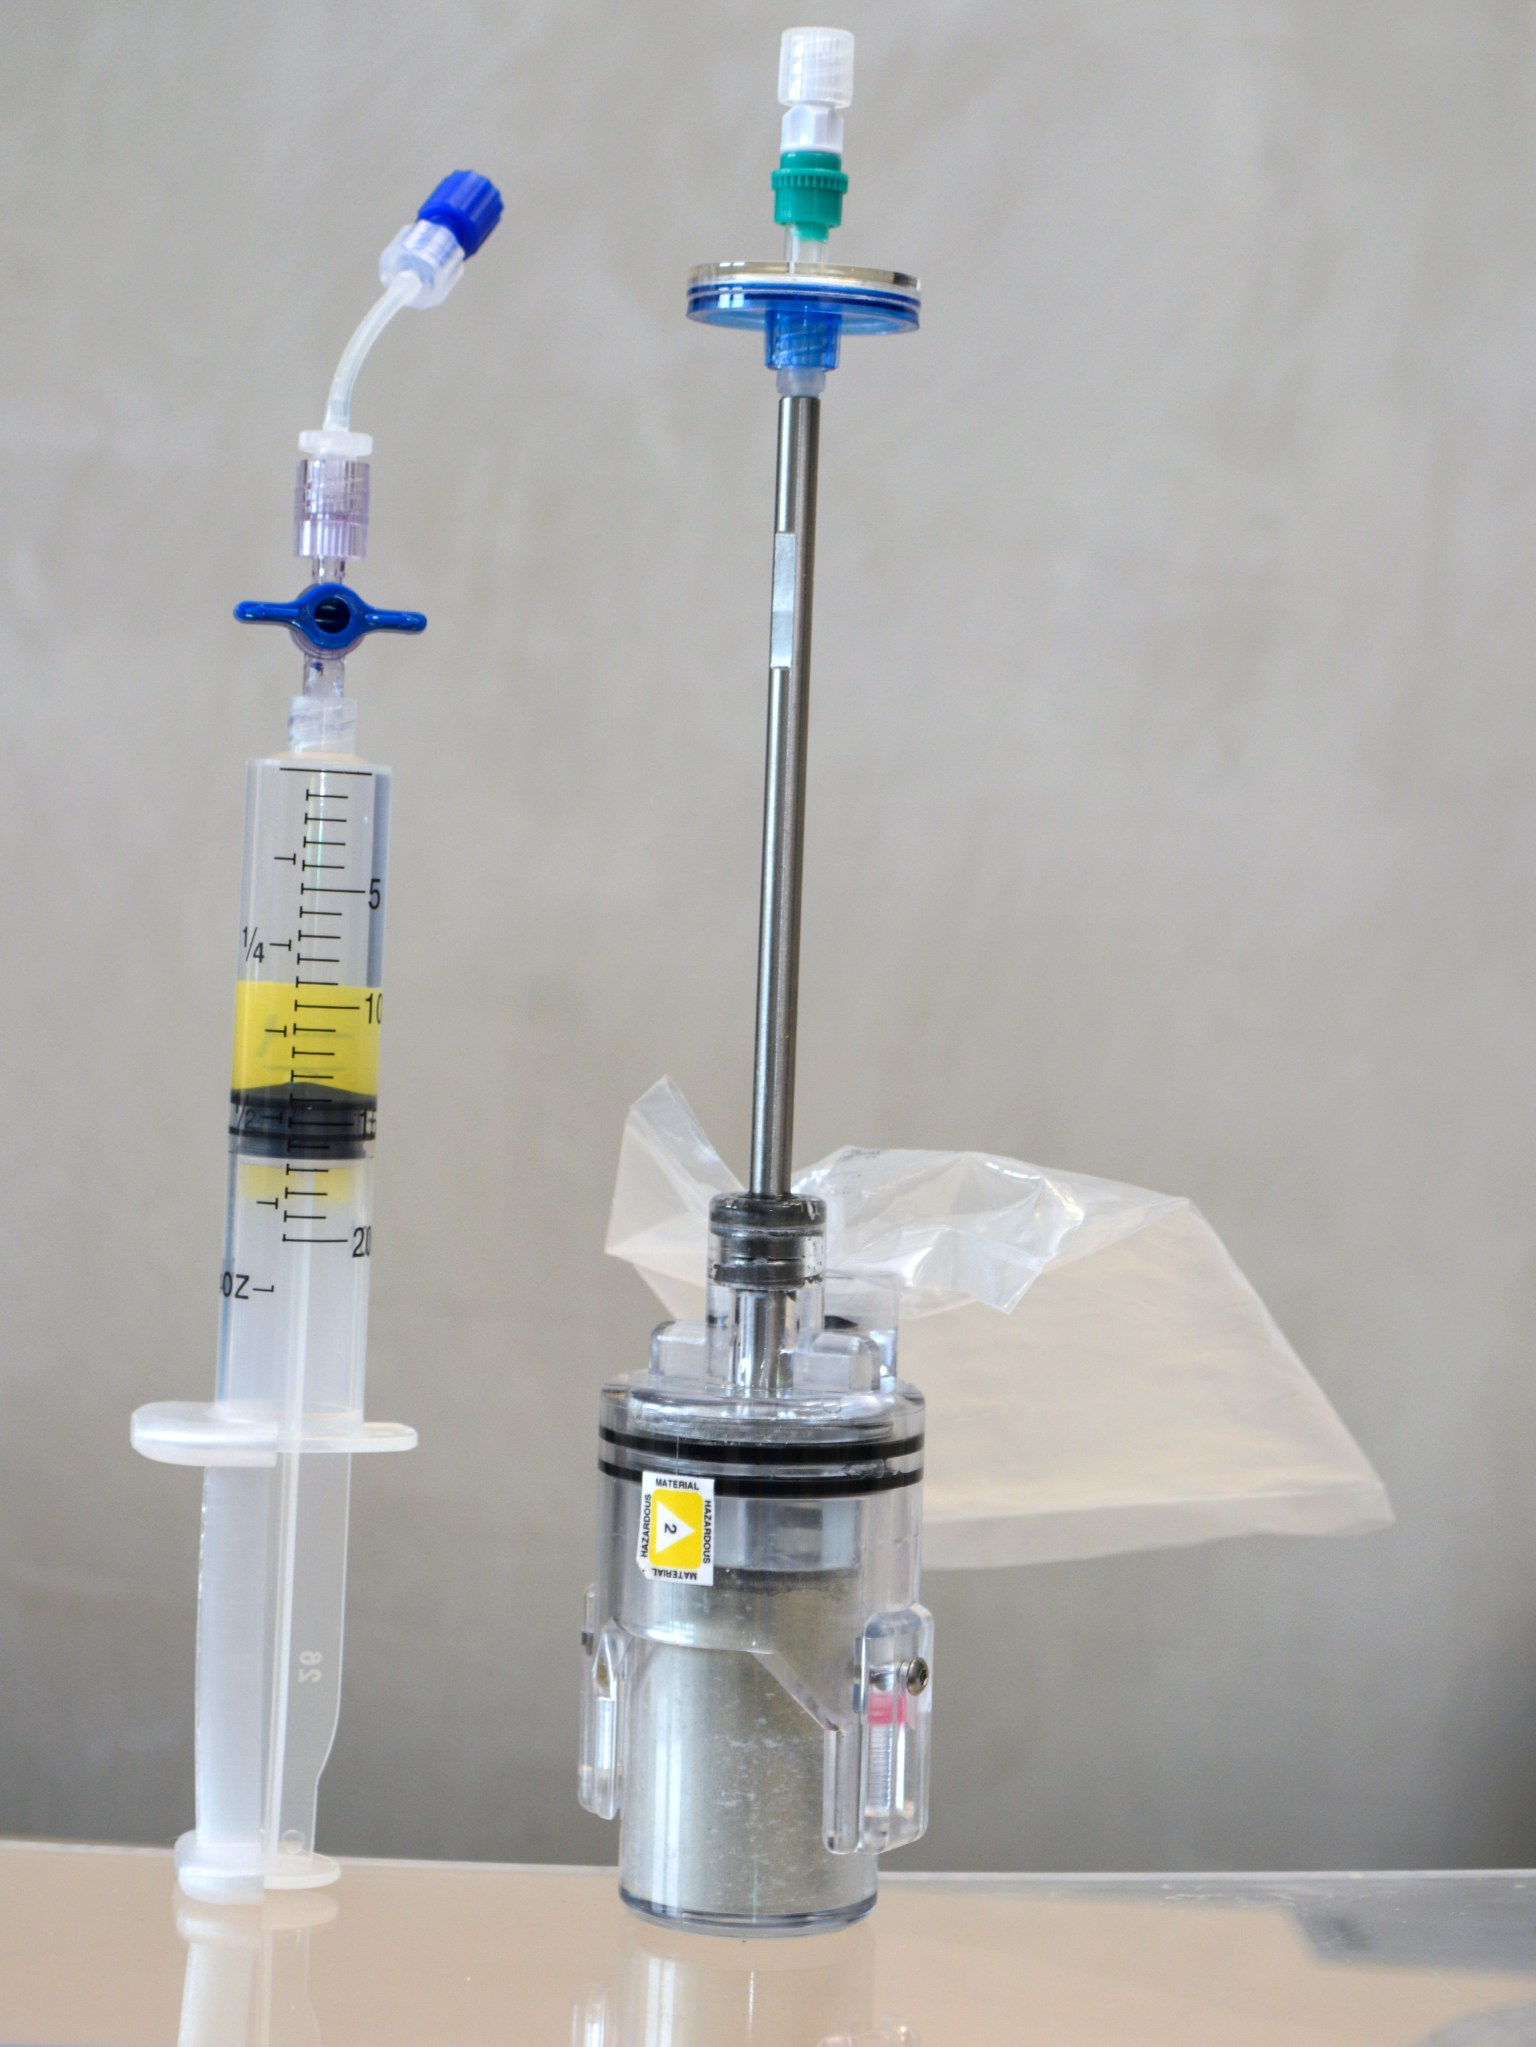 image of syringes used in experiment